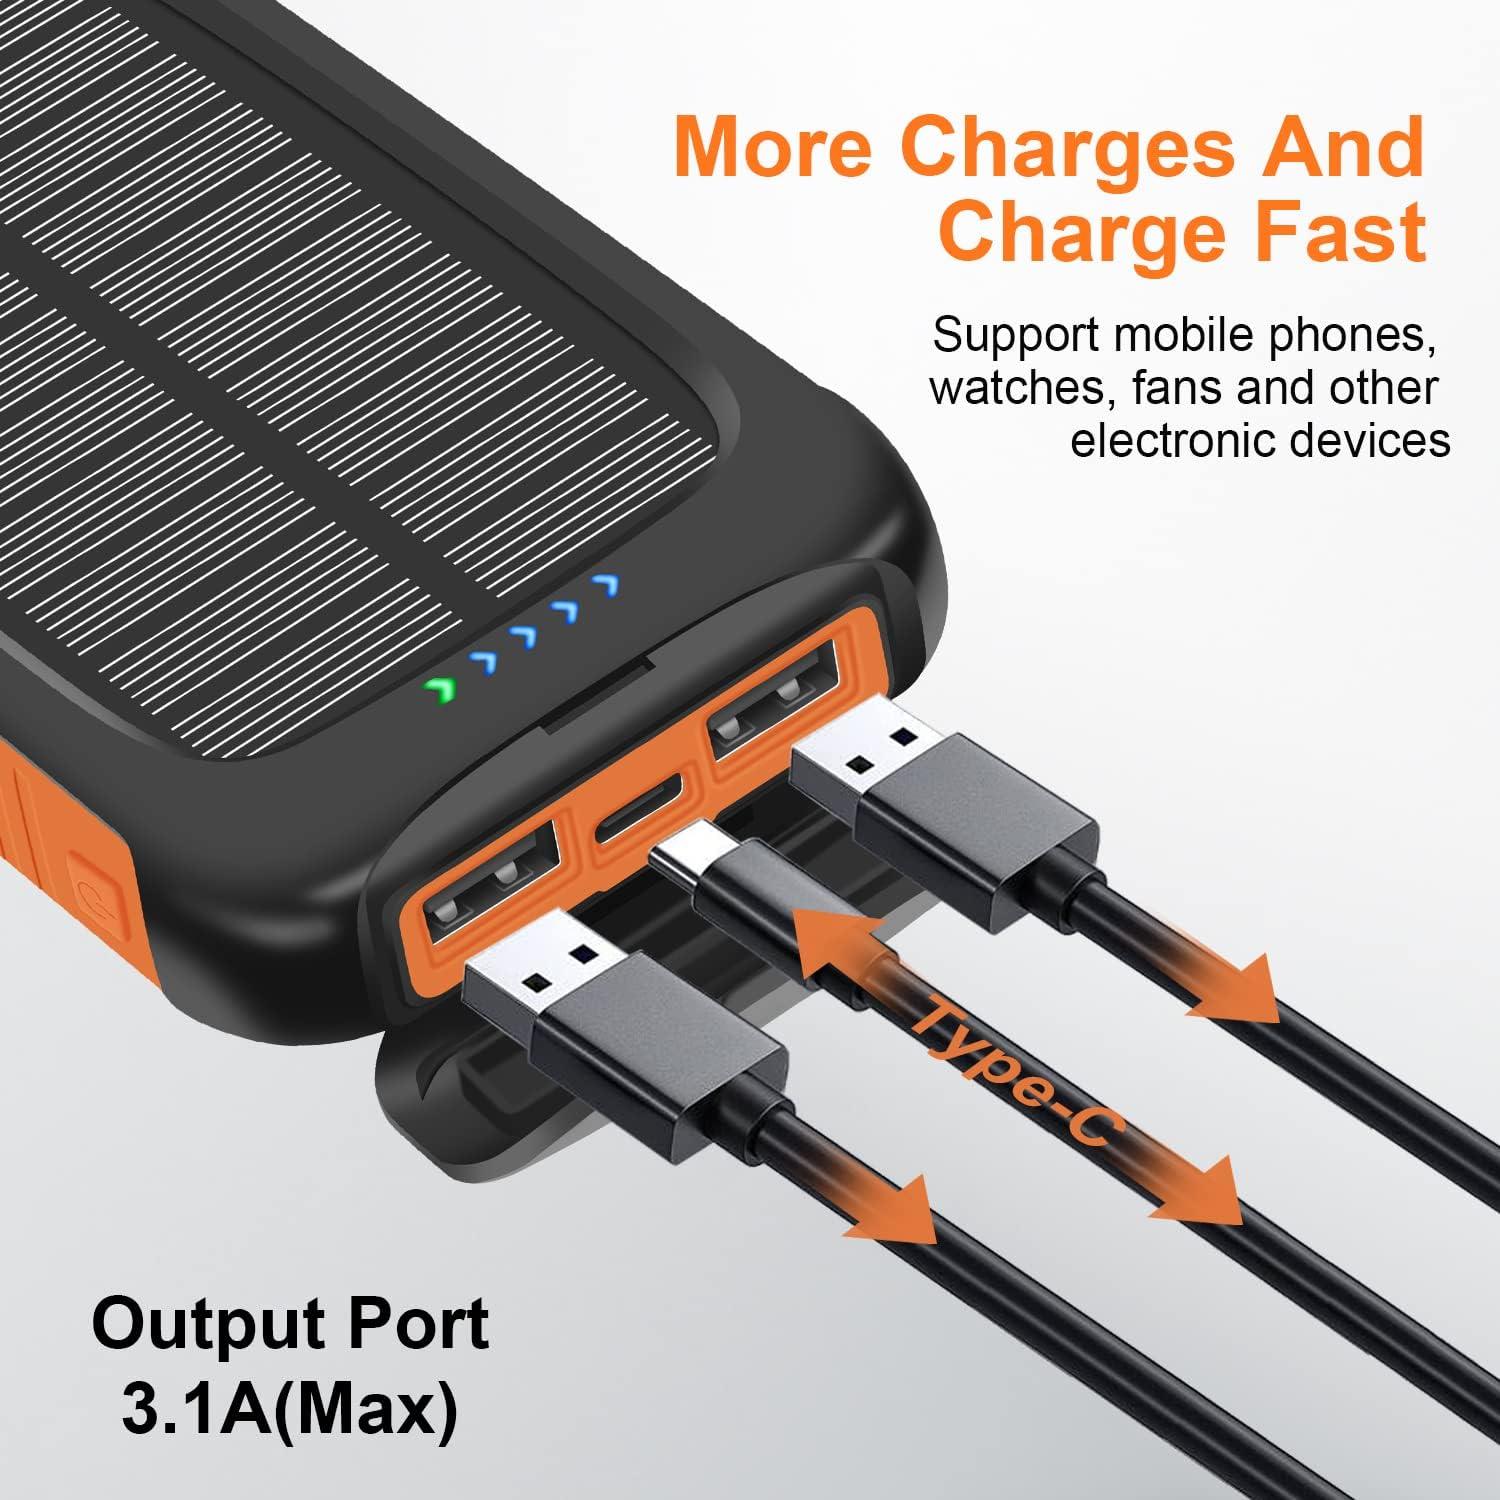 Portable Charger, Solar Charger, 38800mAh Solar Power Bank with 2.4A USB-A  Output Ports Compatible with iPhone, Samsung Galaxy, and More, Dual